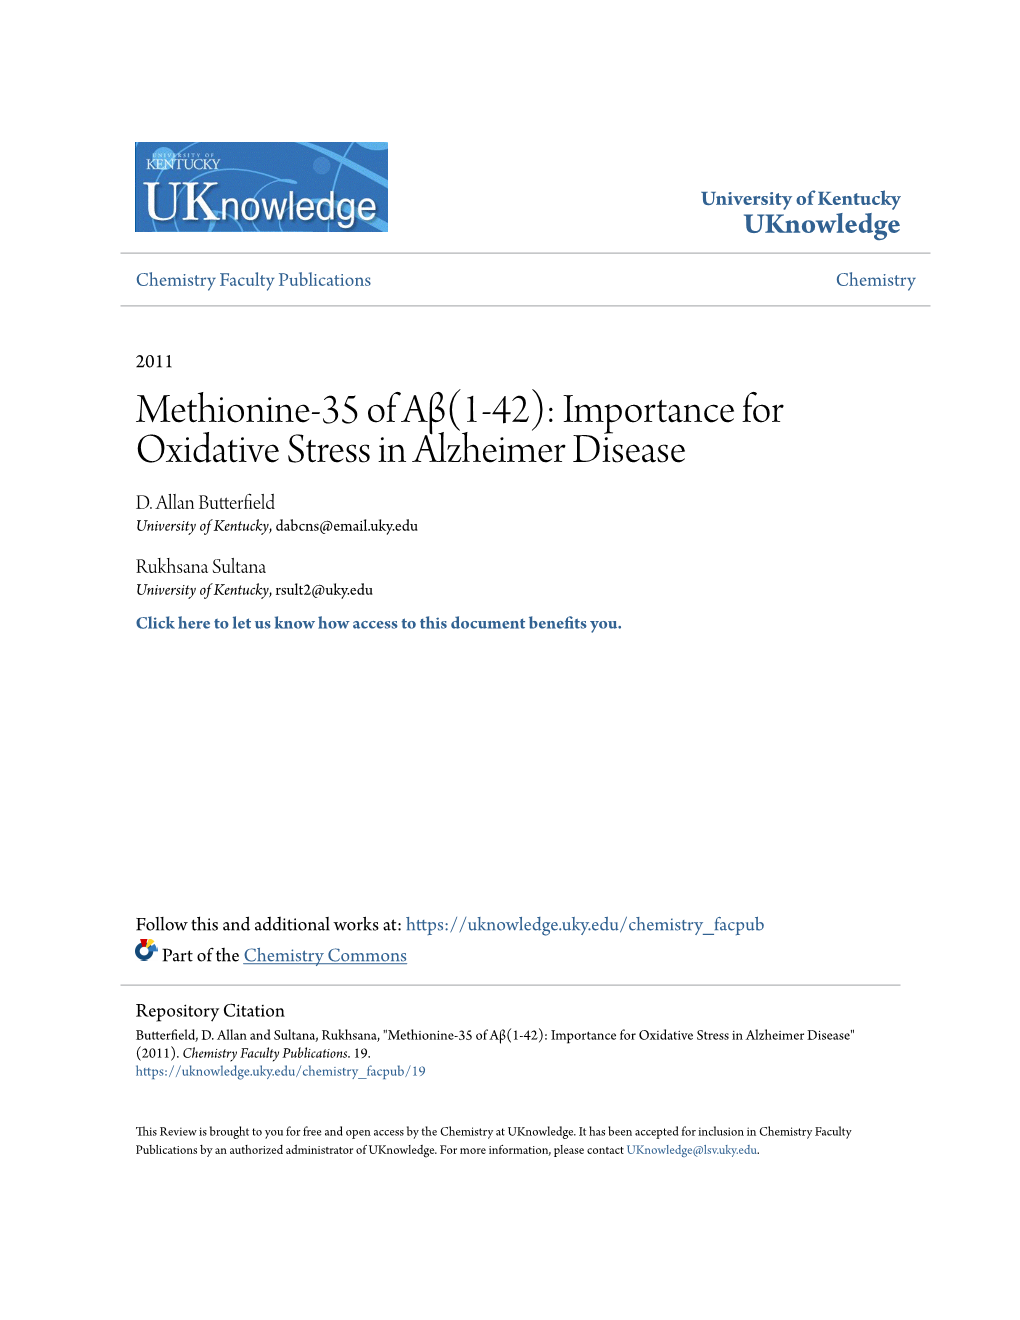 Methionine-35 of Aβ(1-42): Importance for Oxidative Stress in Alzheimer Disease D